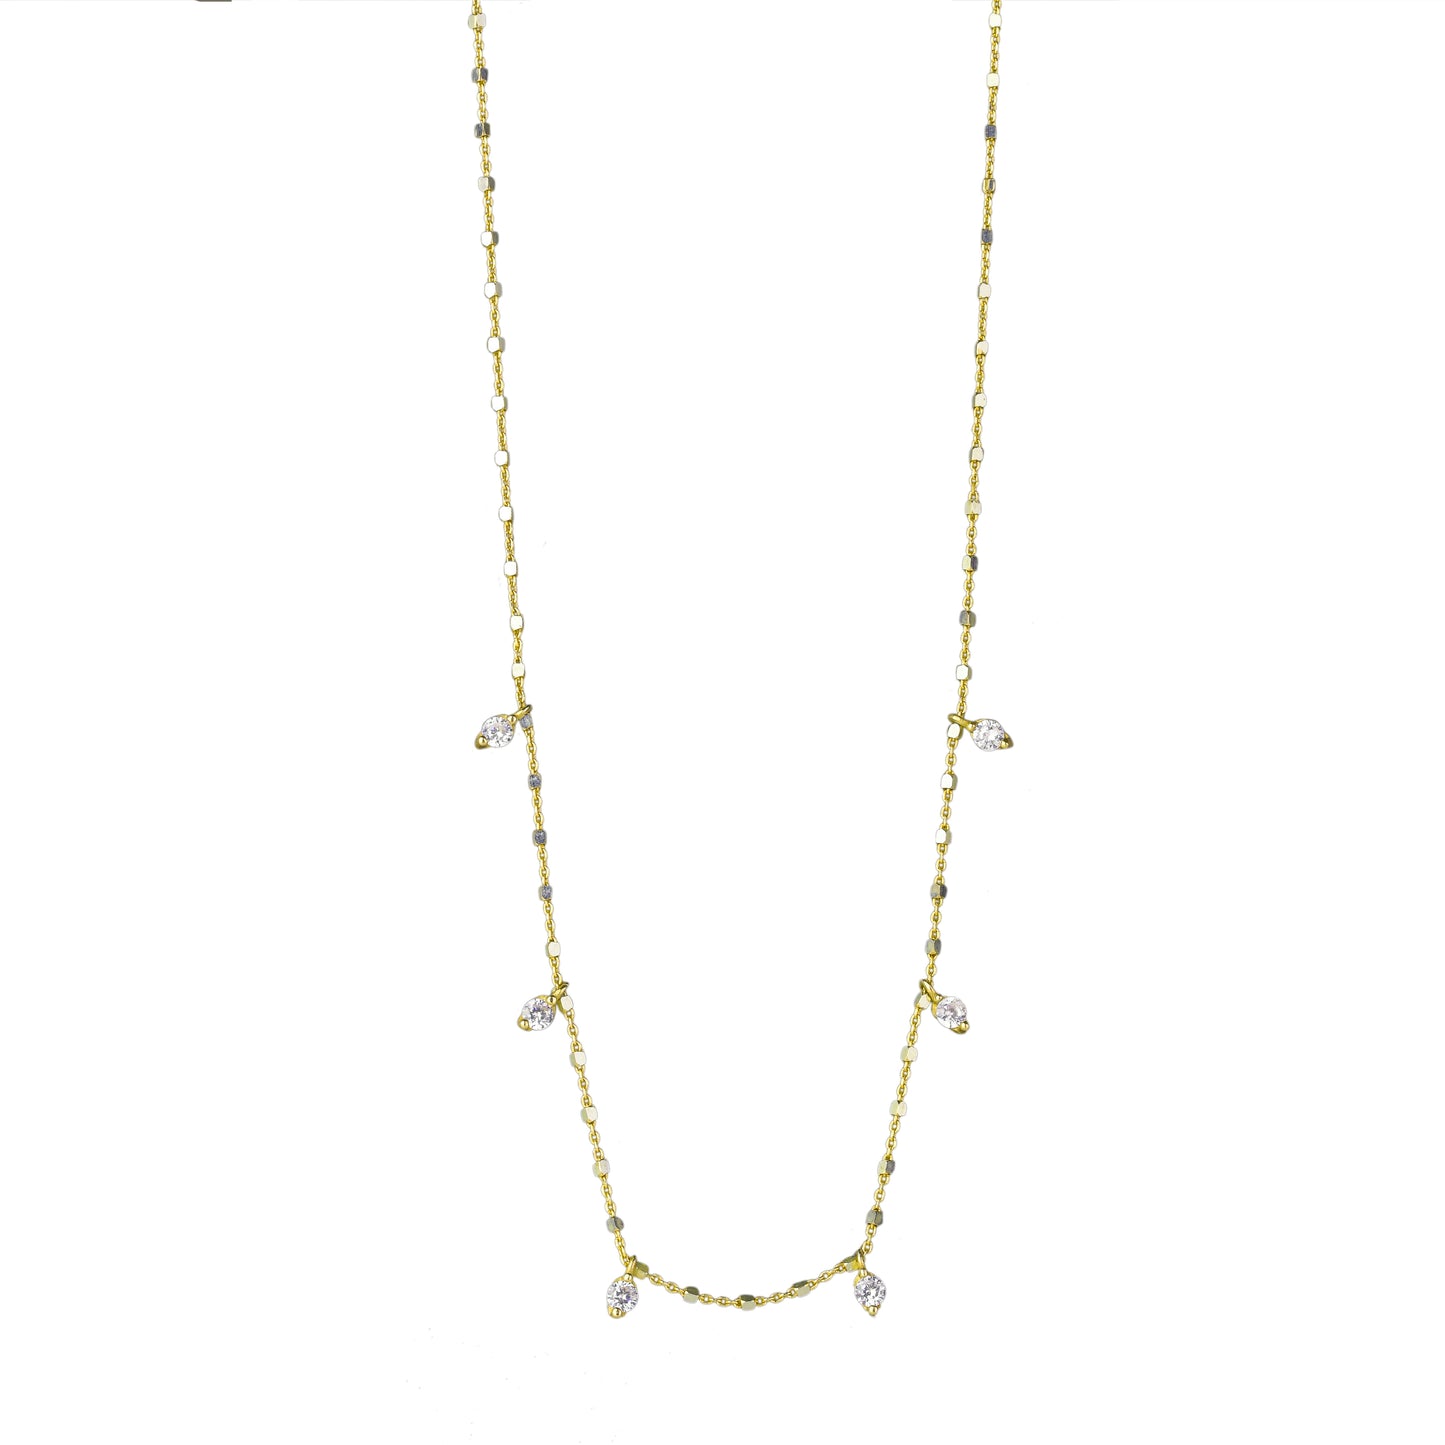 Necklace with charms stones - Gold plated